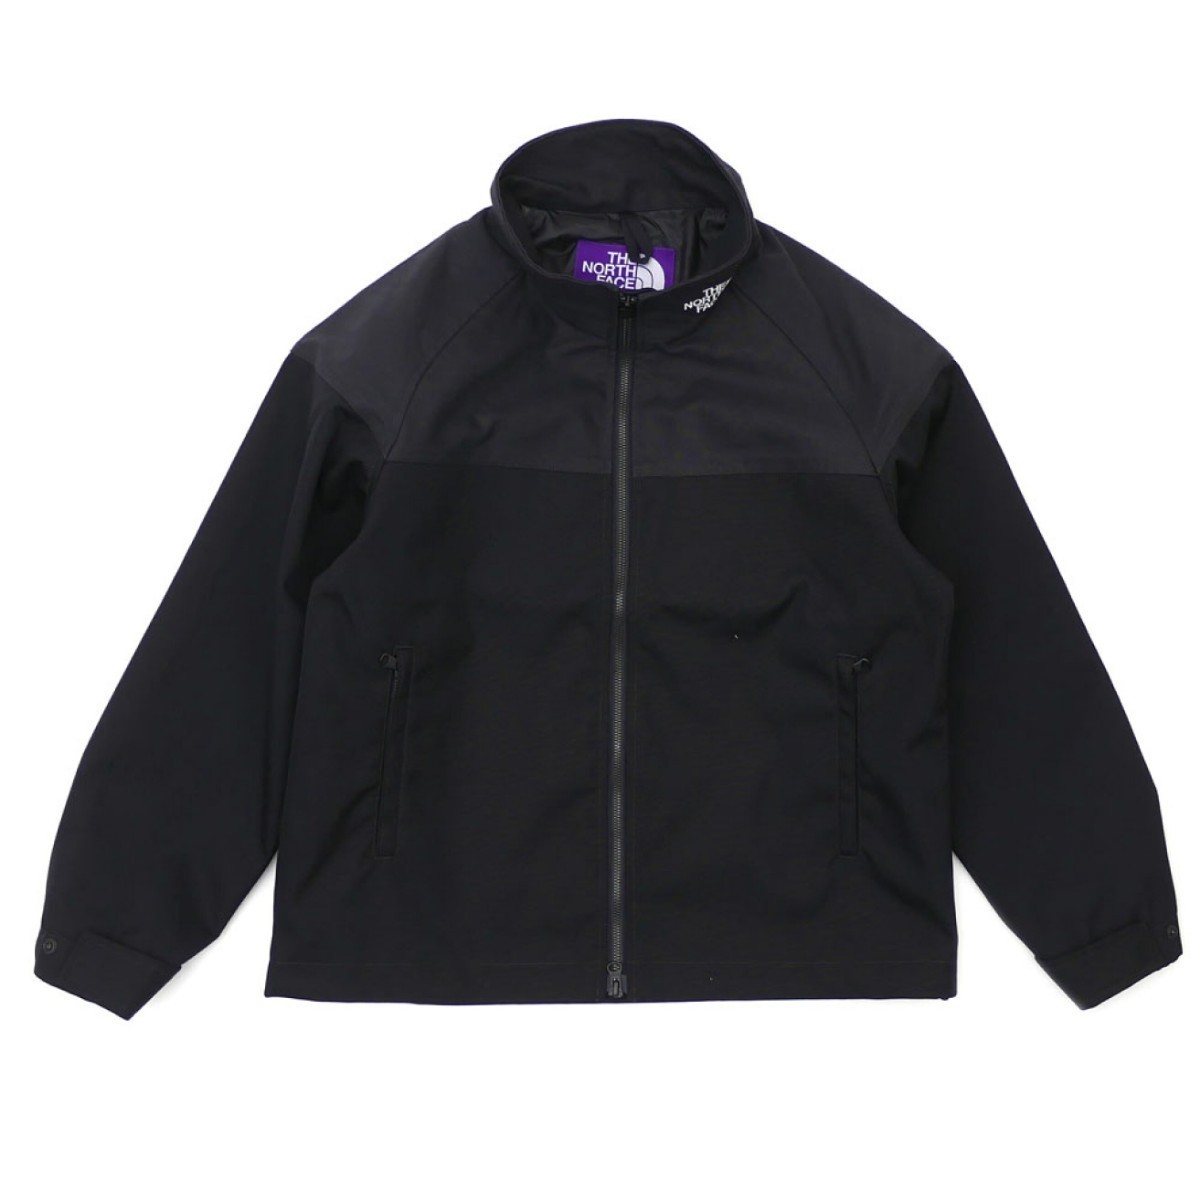 THE NORTH FACE PURPLE LABEL Ron Herman別注 Field Jacket BLACK